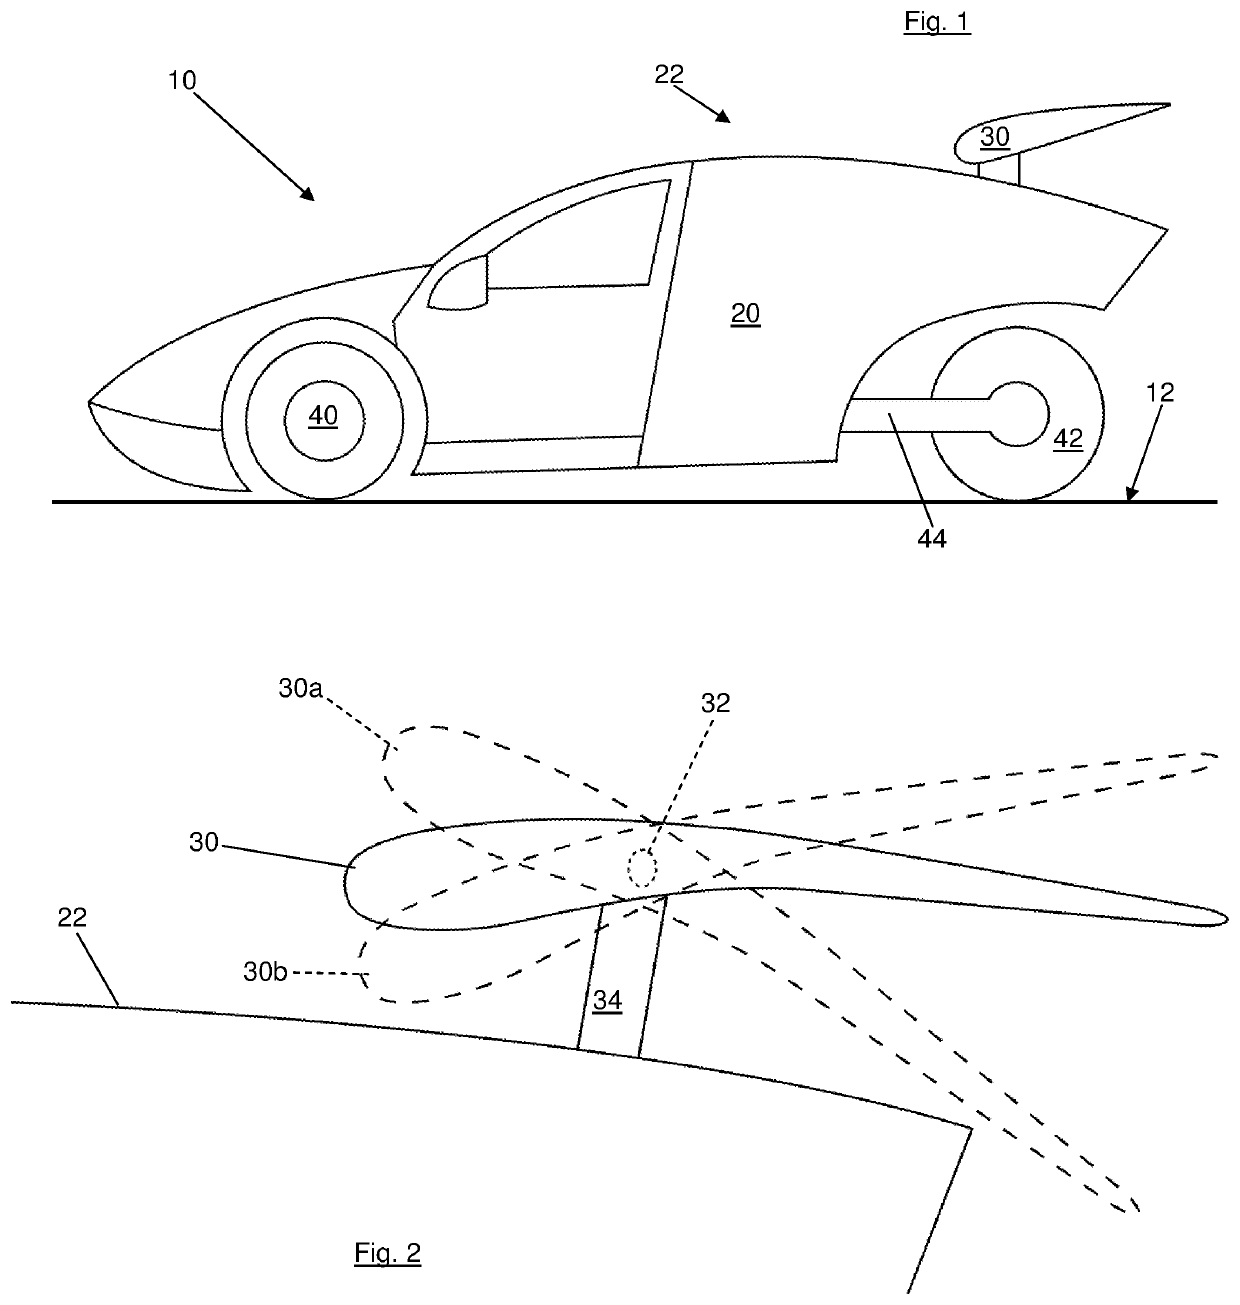 Enhanced vehicle efficiency using airfoil to raise rear wheels above road surface